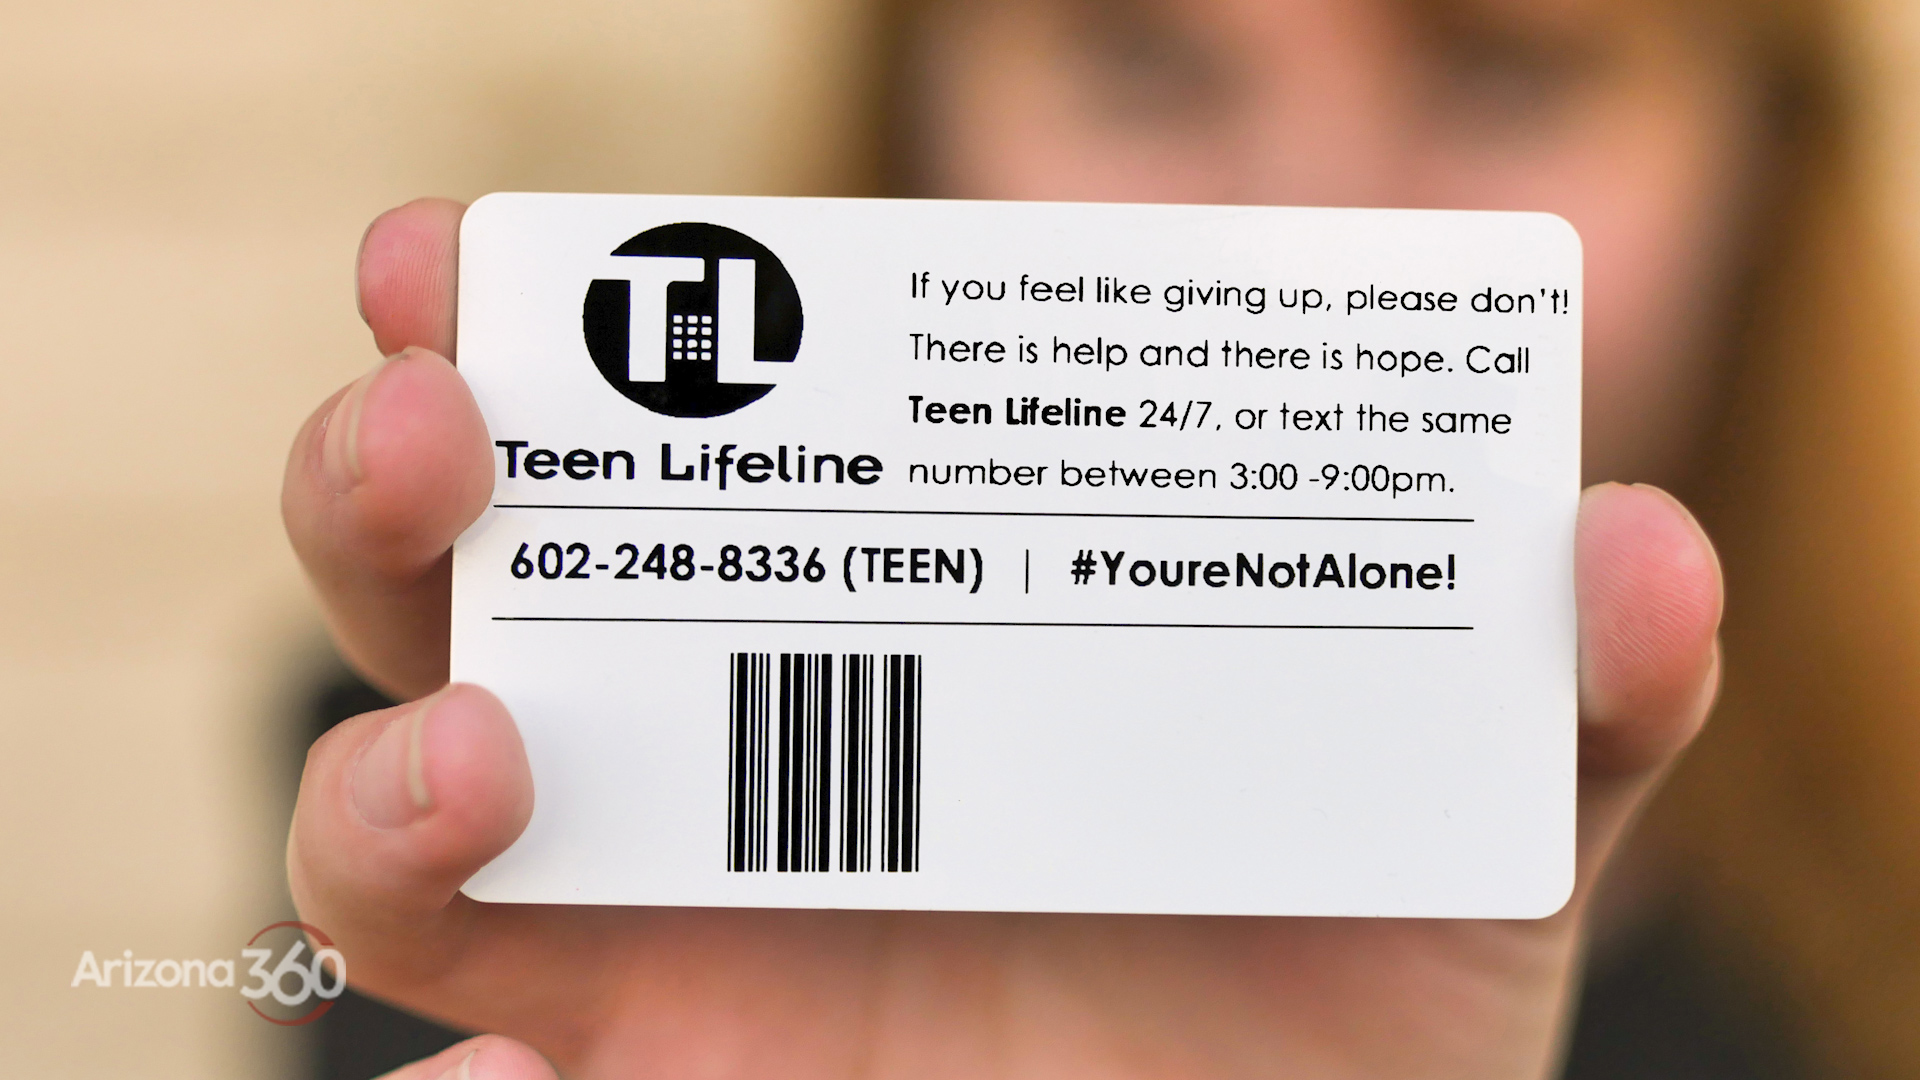 Come July 2021 school identification cards will have the Teen Lifeline number printed on the back for all who are struggling with suicidal thoughts or other concerns. 